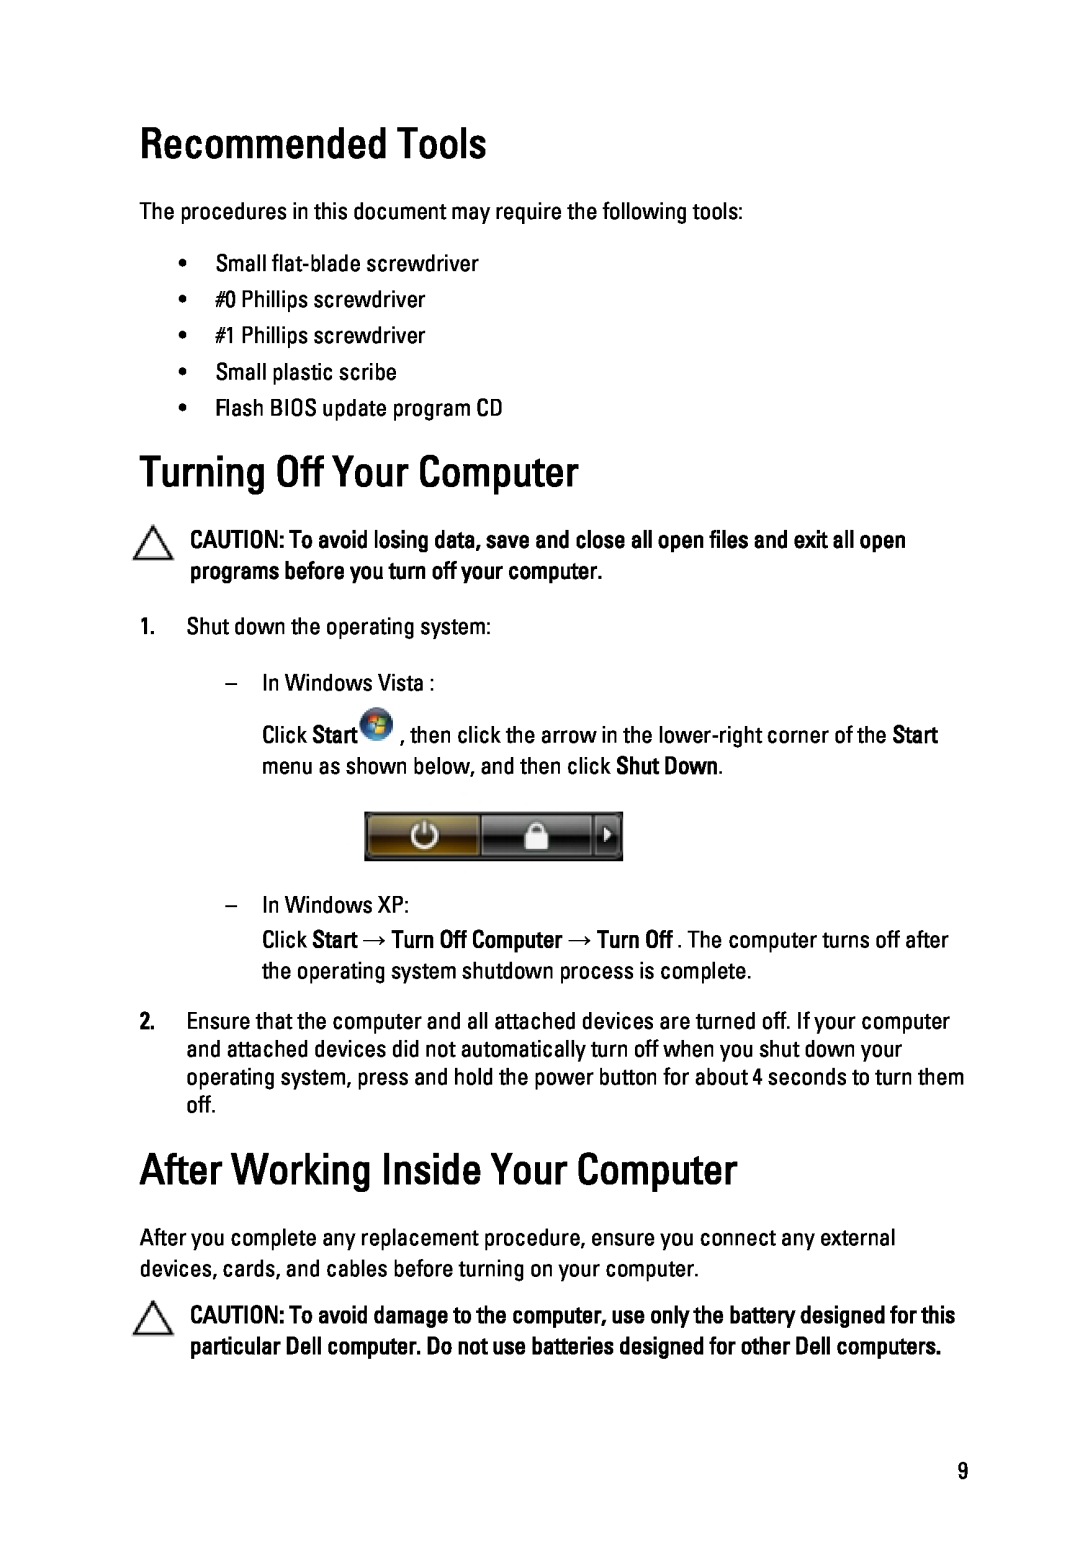 Dell P22G owner manual Recommended Tools, Turning Off Your Computer, After Working Inside Your Computer 